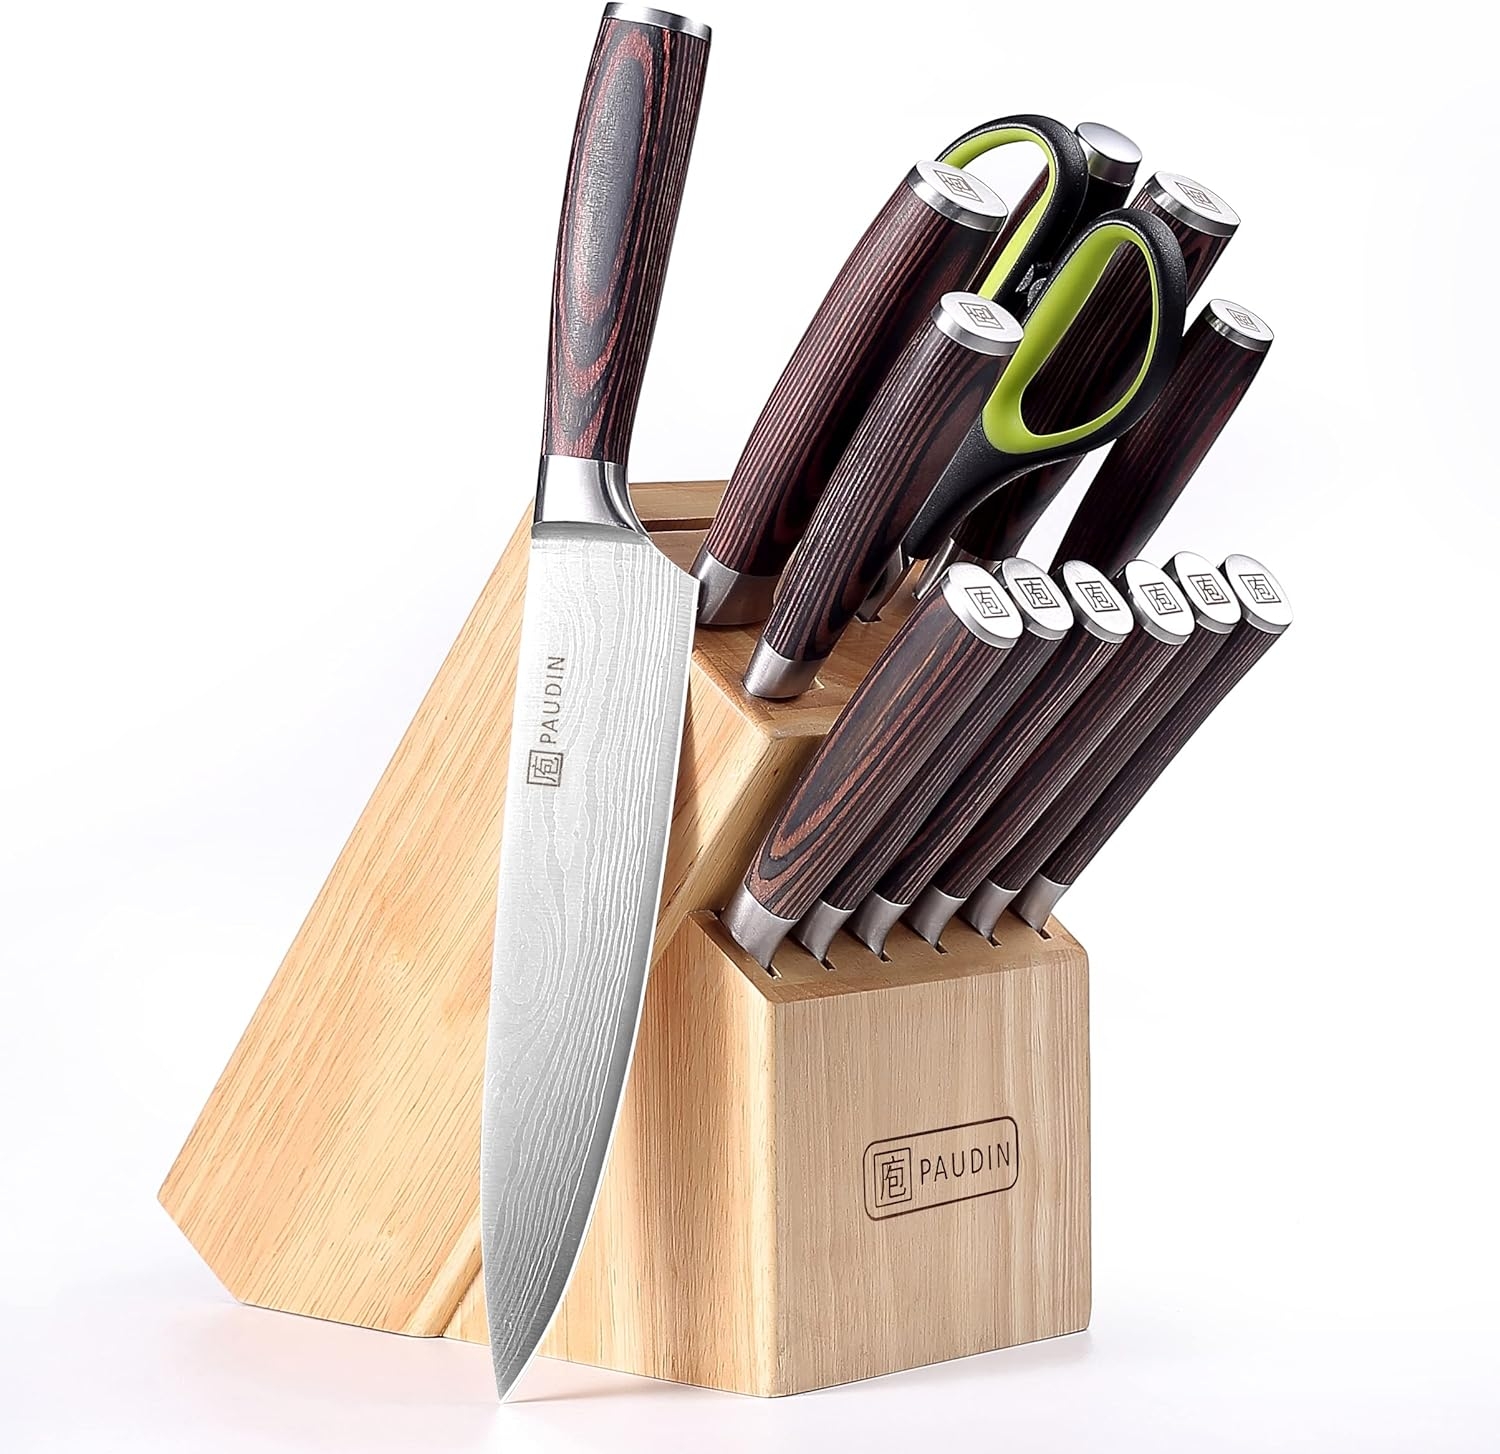  PAUDIN Kitchen Knife Set, 3 Piece High Carbon Stainless Steel  Professional Chef Knife Set with Ultra Sharp Blade & Wooden Handle (Kitchen  Knife Set 3 Pcs): Home & Kitchen